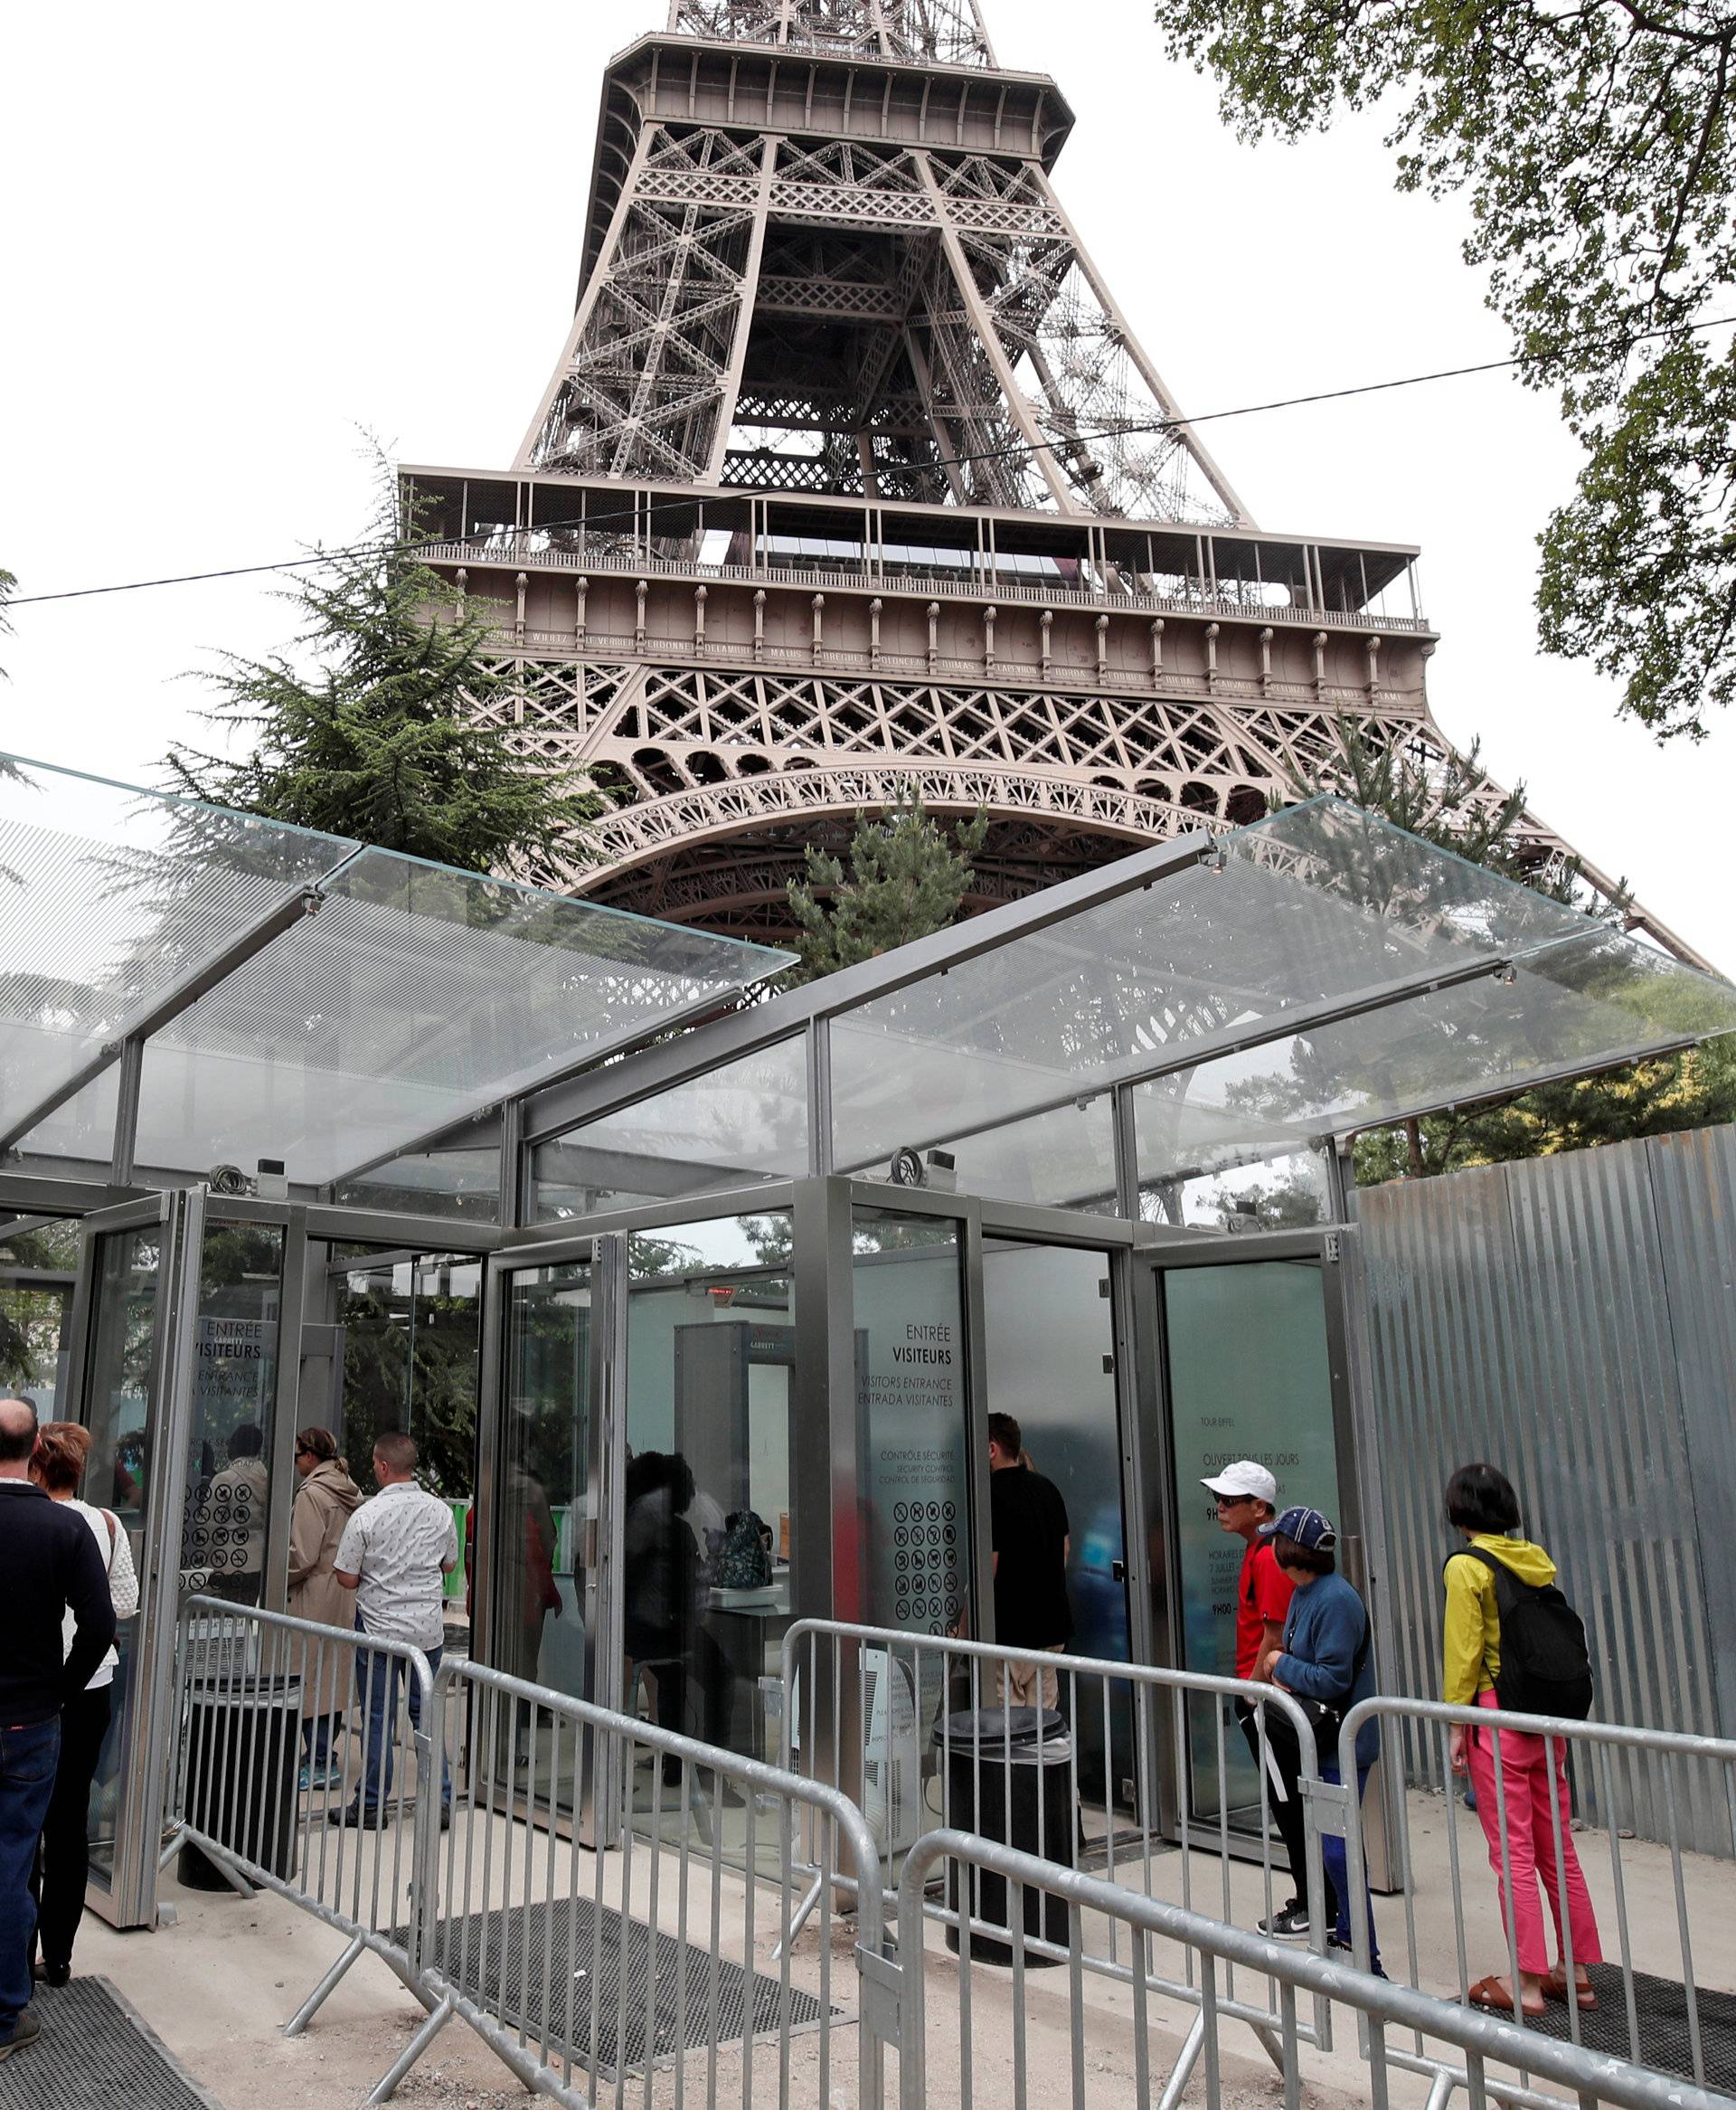 Tourists and visitors queue to pass the security check at the entrance to the new glass fence around the Eiffel Tower in Paris